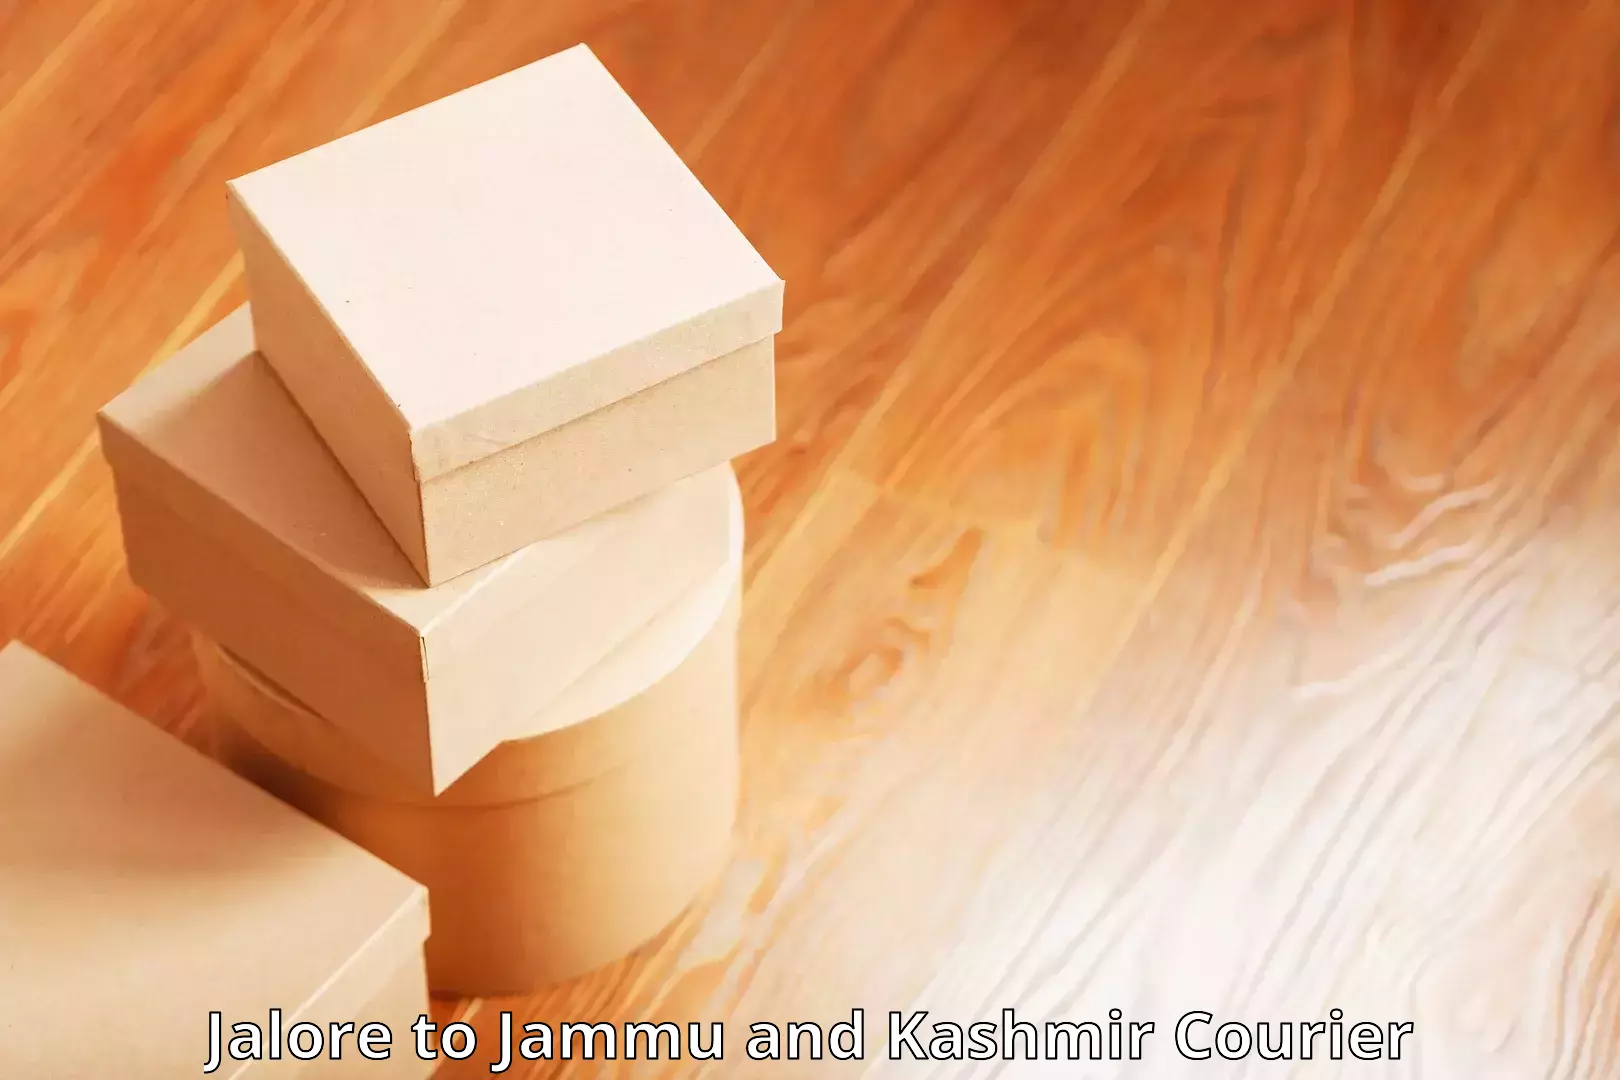 Nationwide shipping capabilities Jalore to Anantnag